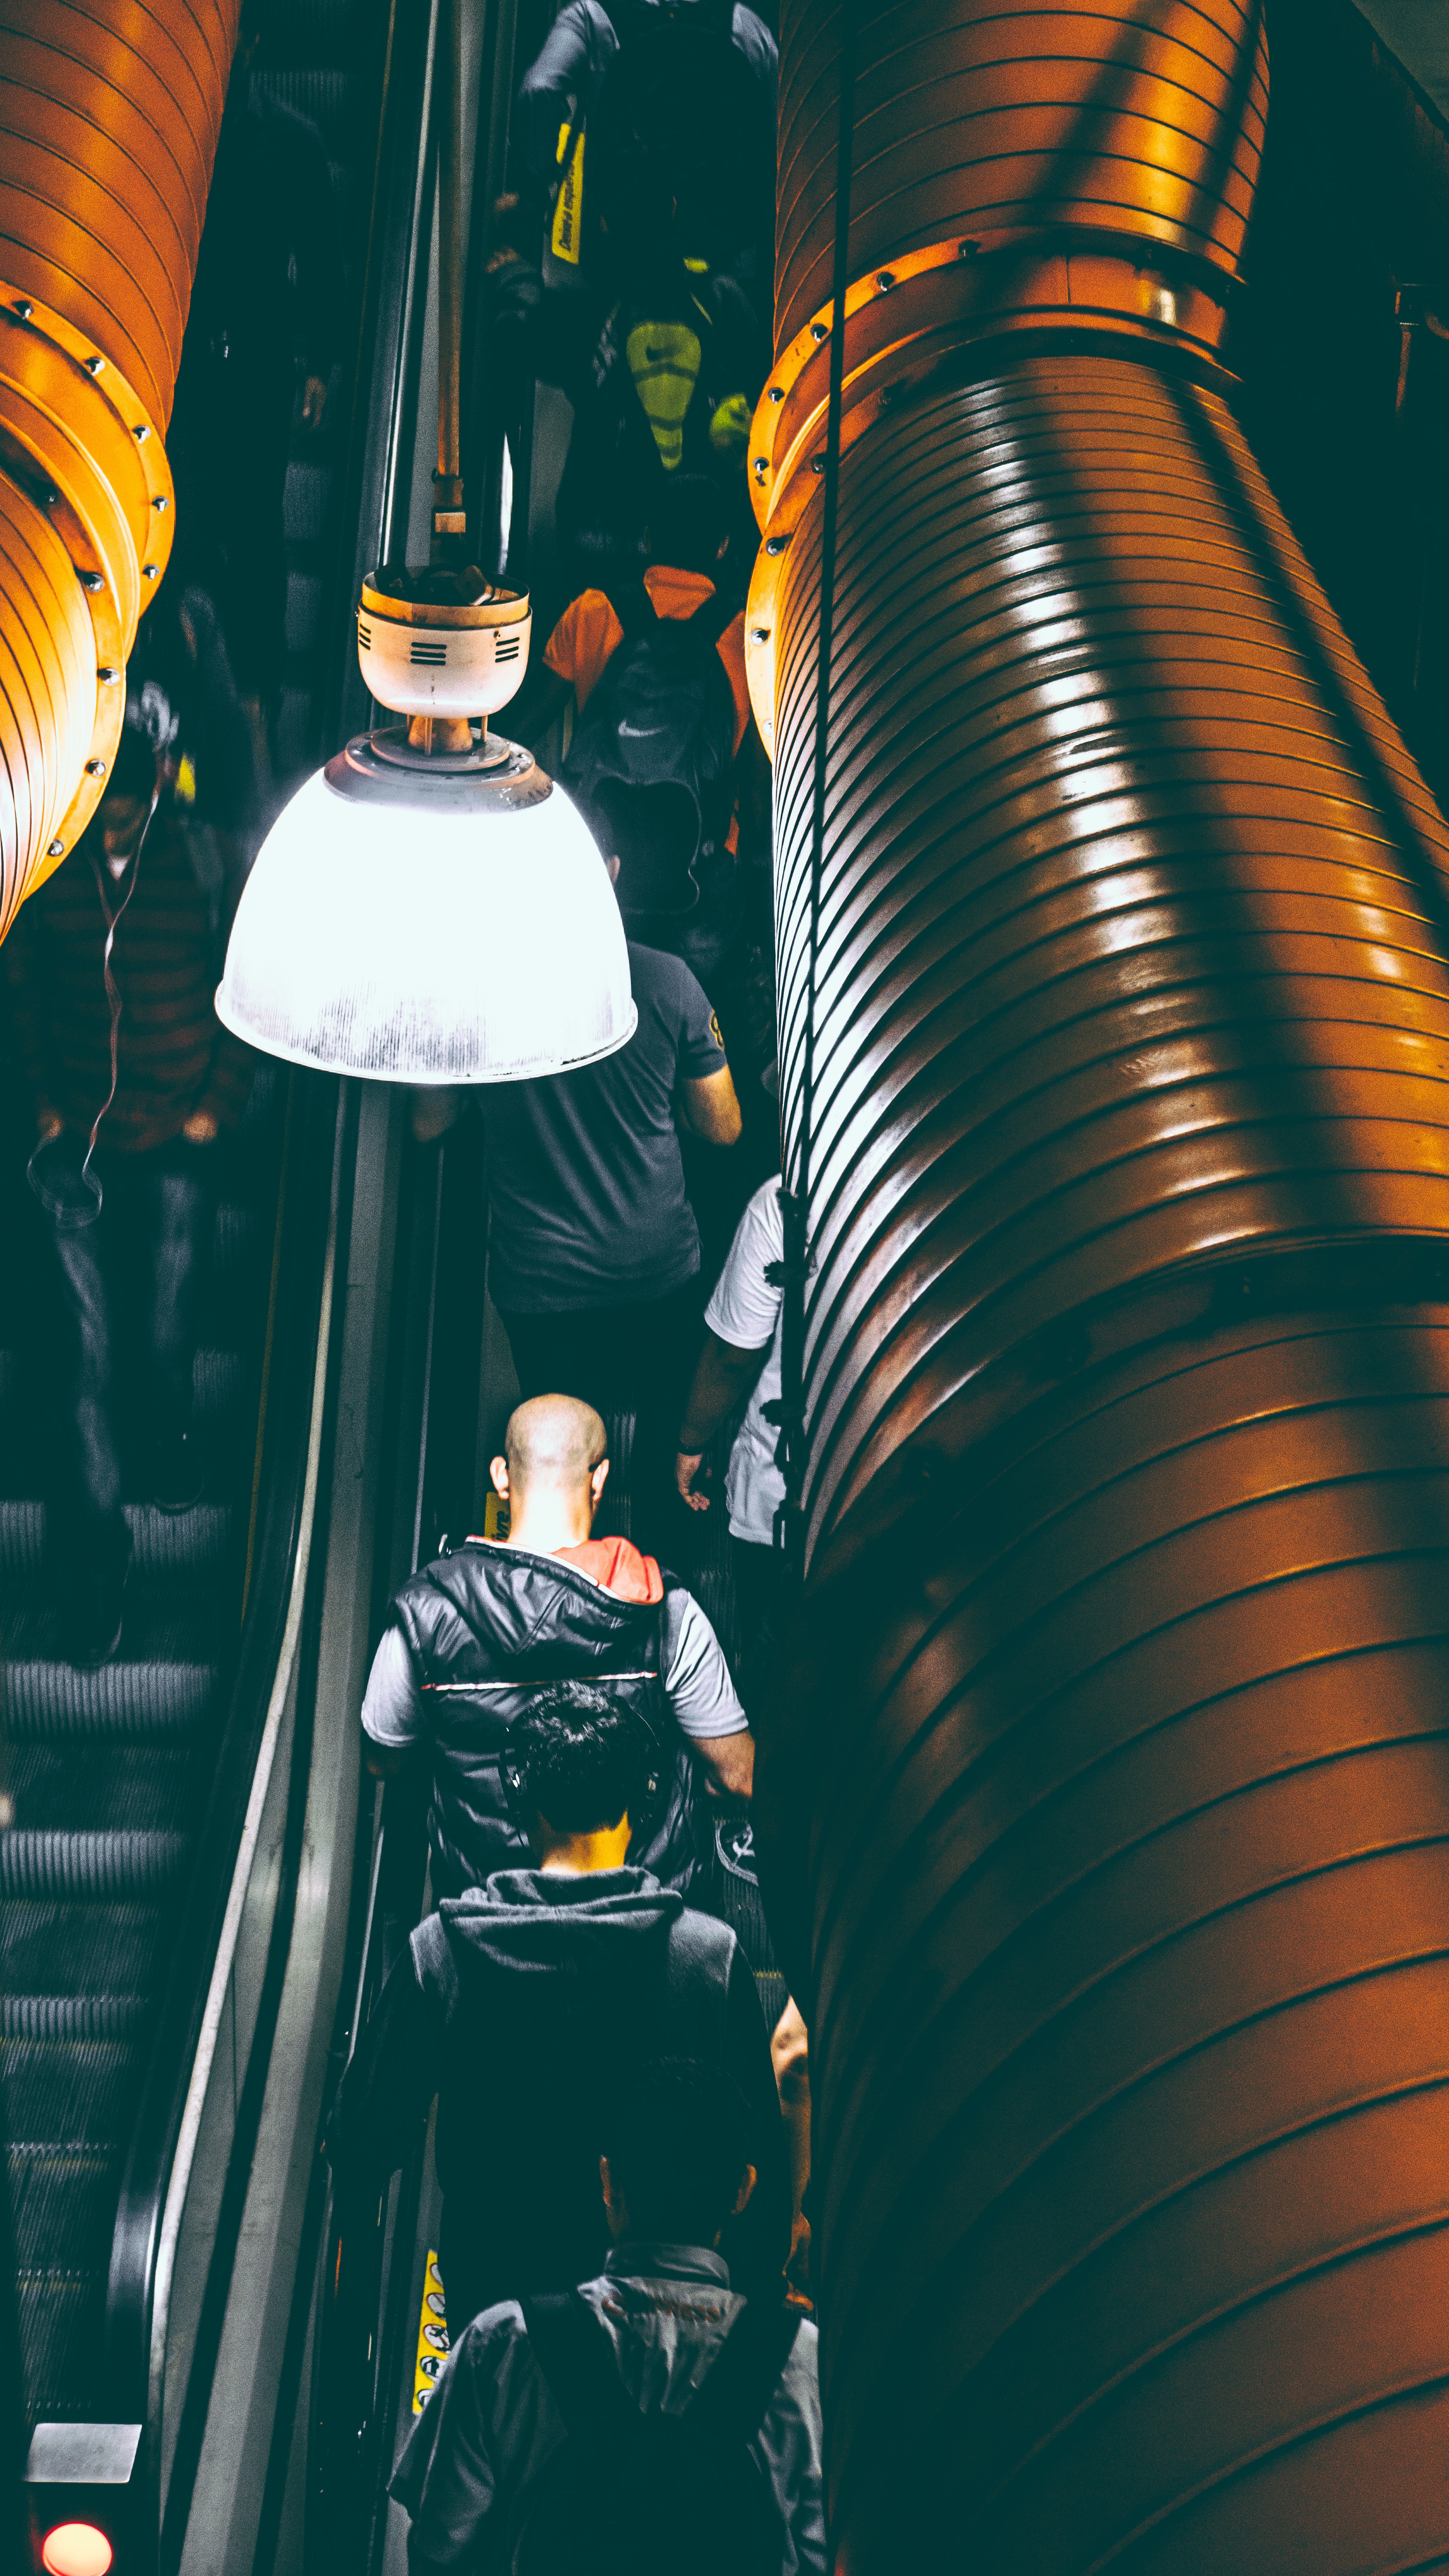 Photo of people using escalator inside a building